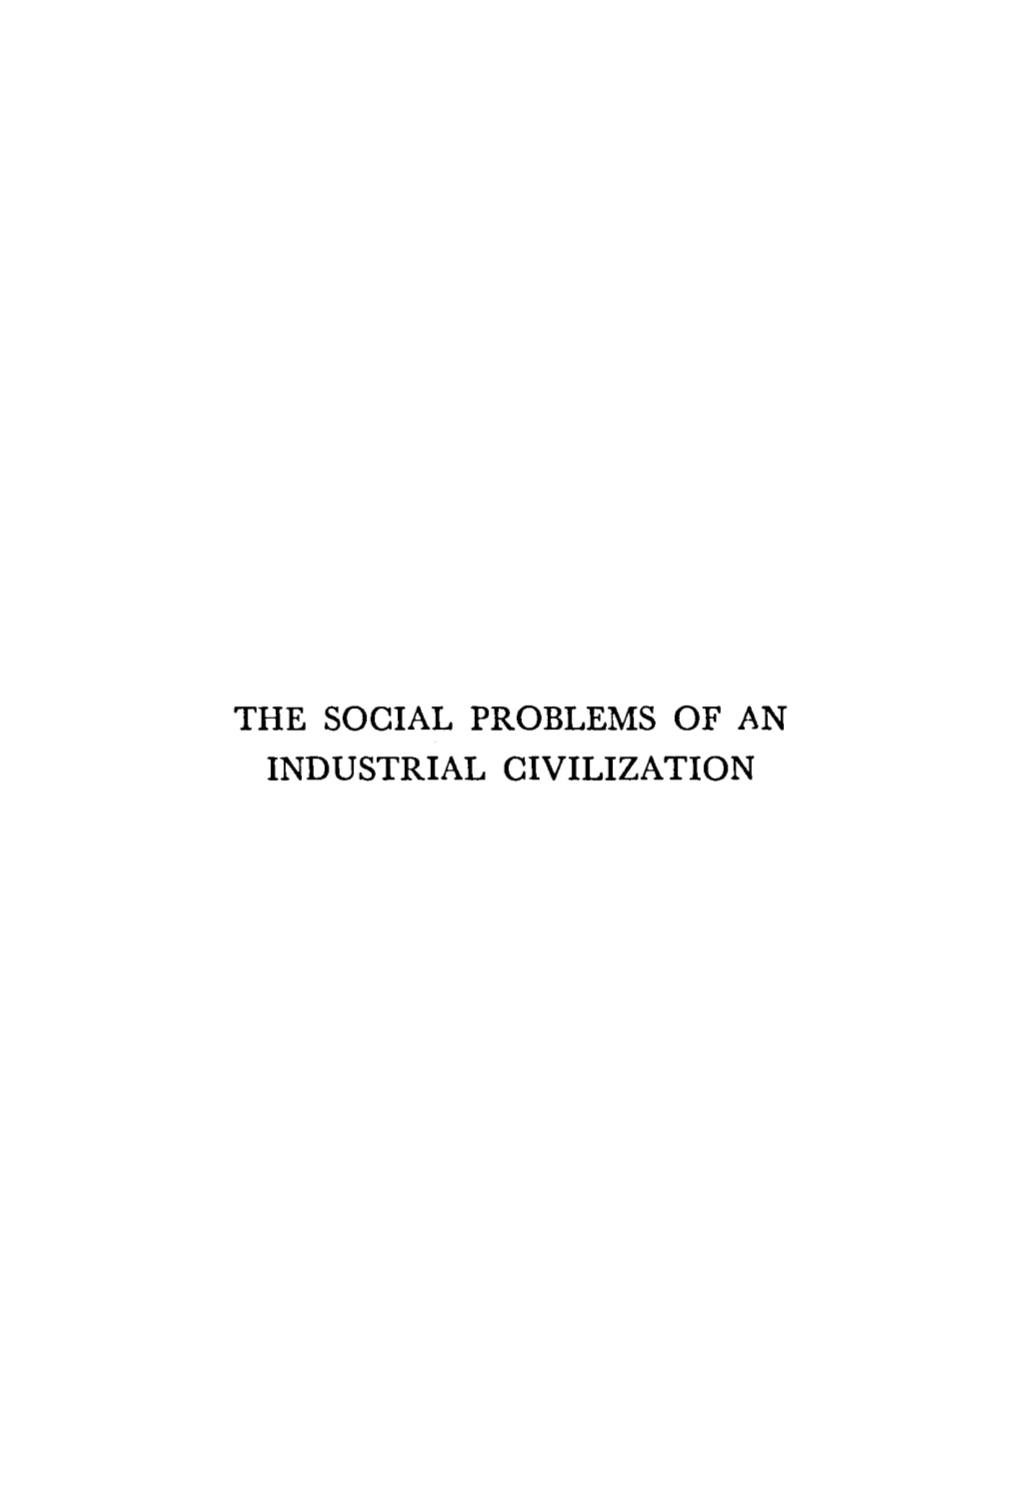 The Social Problems of an Industrial Civilization the .Social Problems of an Industrial Civilization